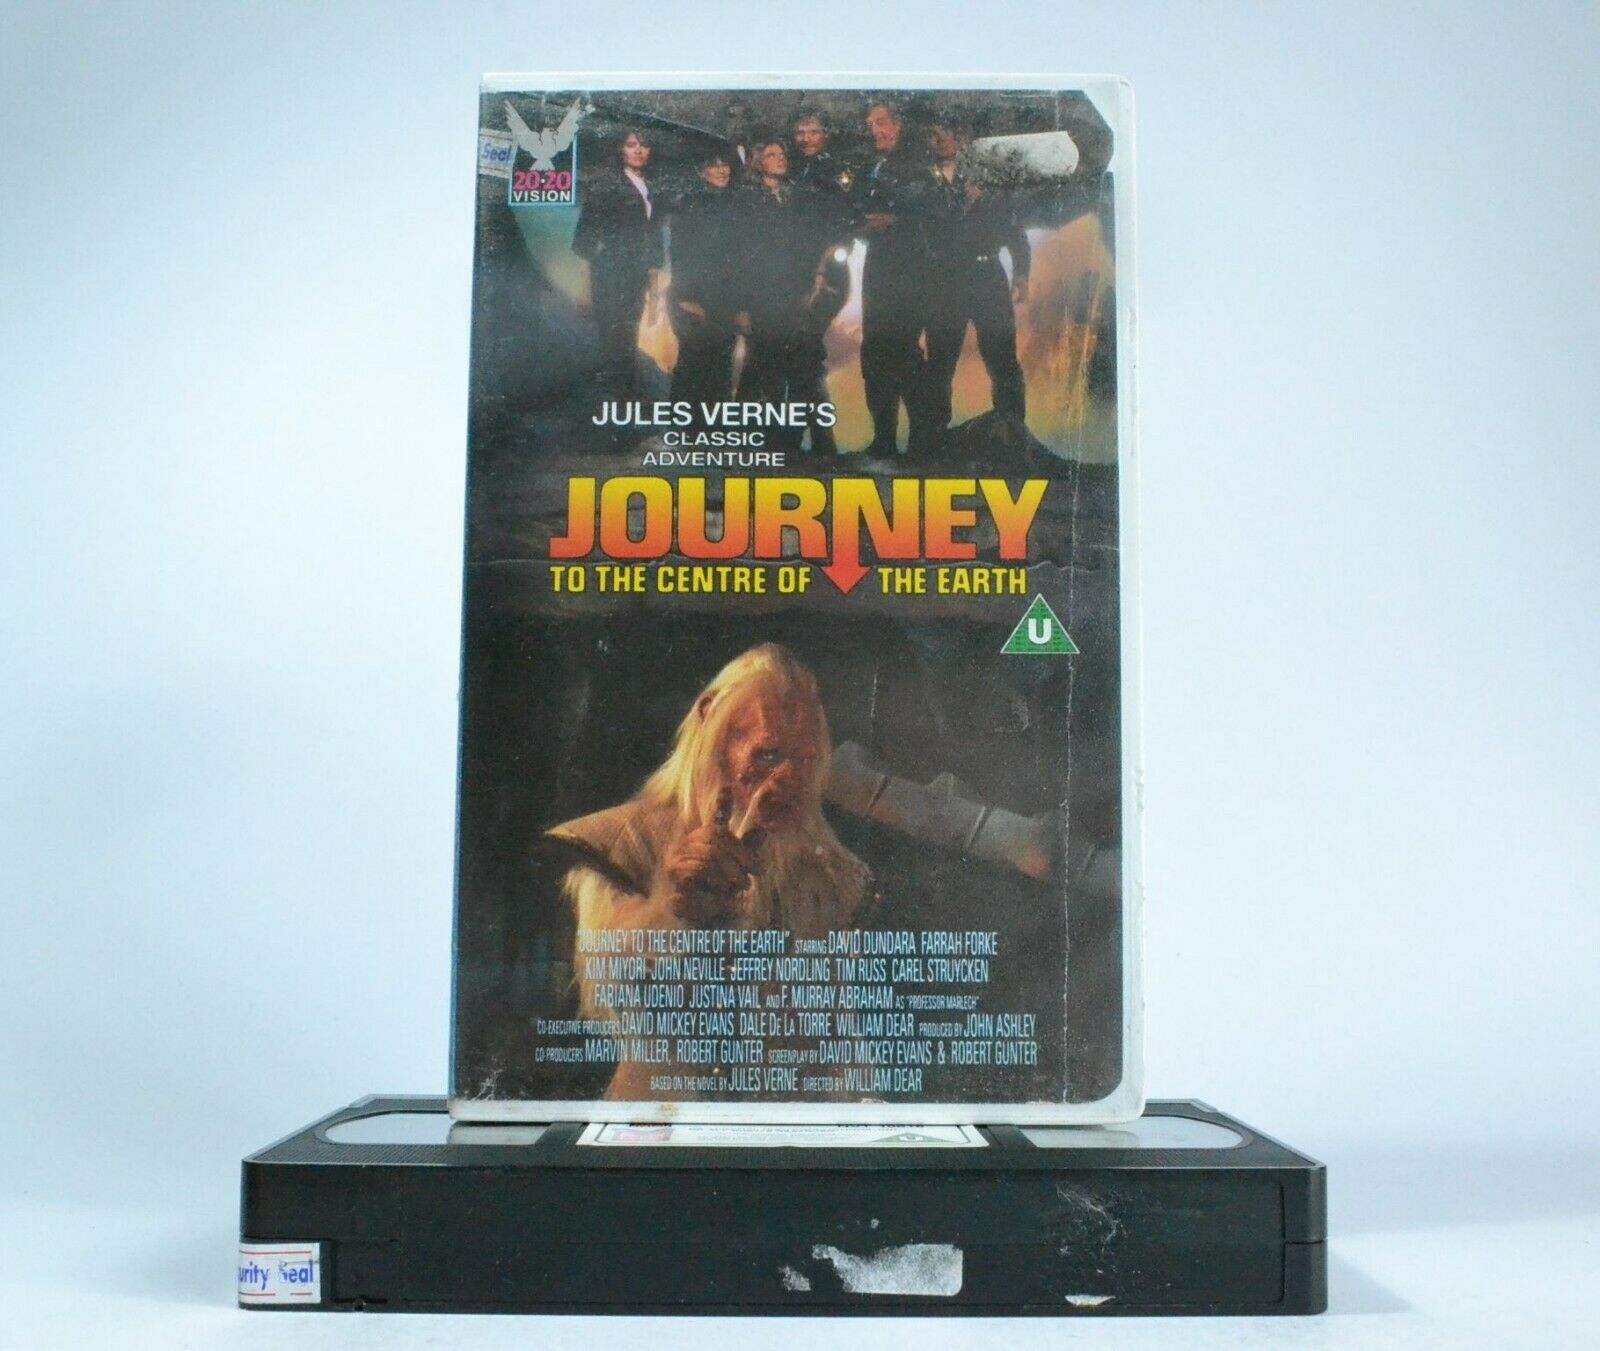 Journey To The Centre Of The Earth: NBC T.V. (1993) - D.Dundara - J.Verne - VHS-